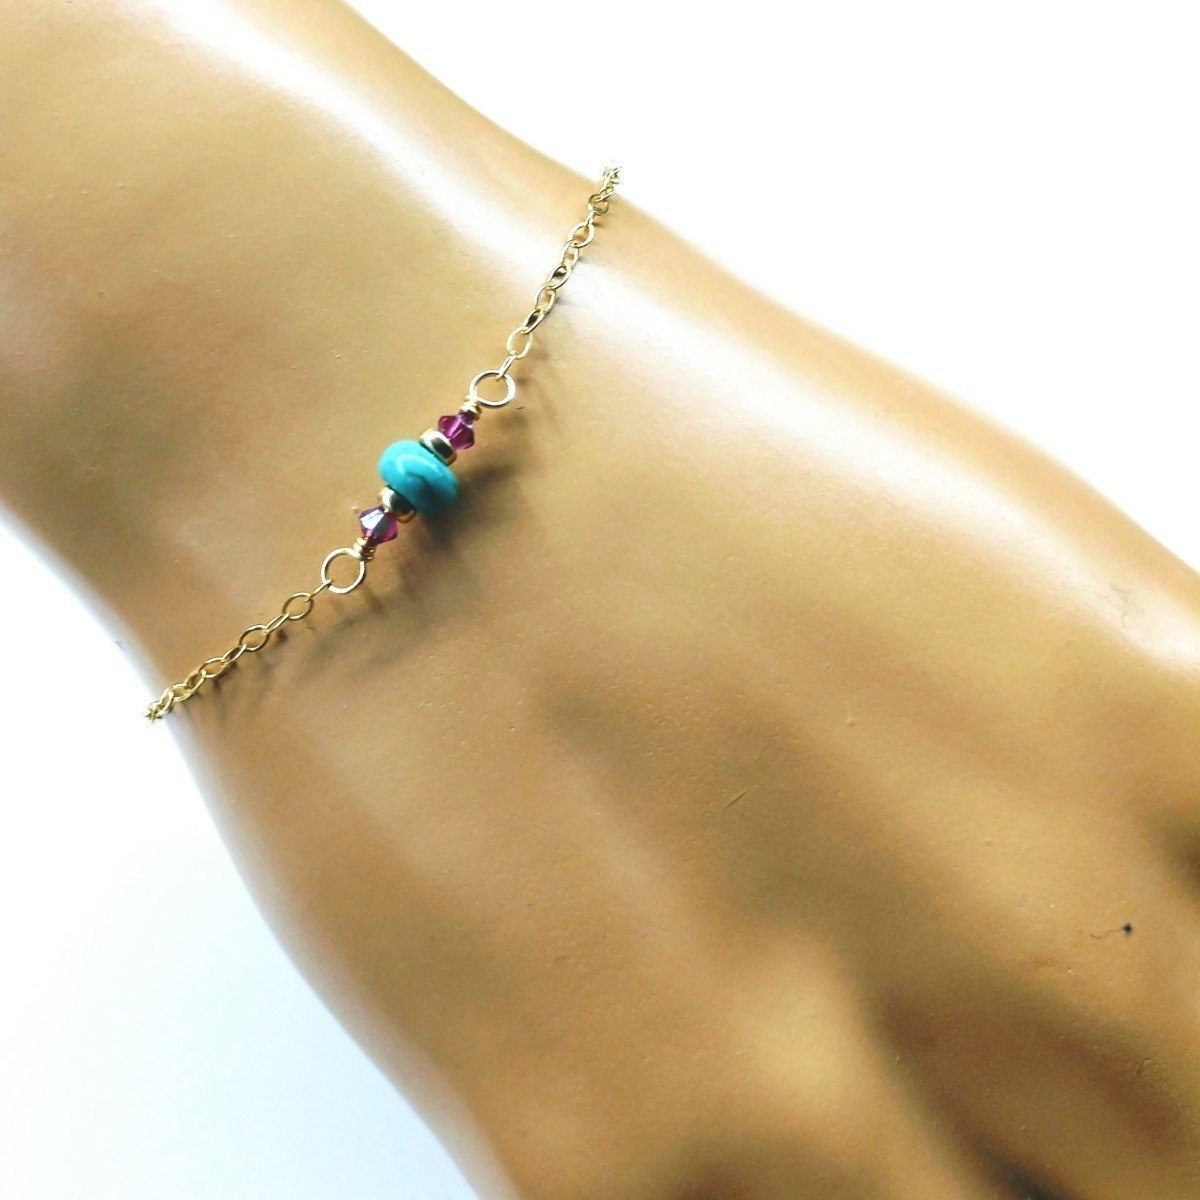 Handcrafted 14K Gold Filled Turquoise and Fuchsia Bracelet with Sparkly Chain - Sleek Design for All Occasions - Bracelets - Bijou Her -  -  - 